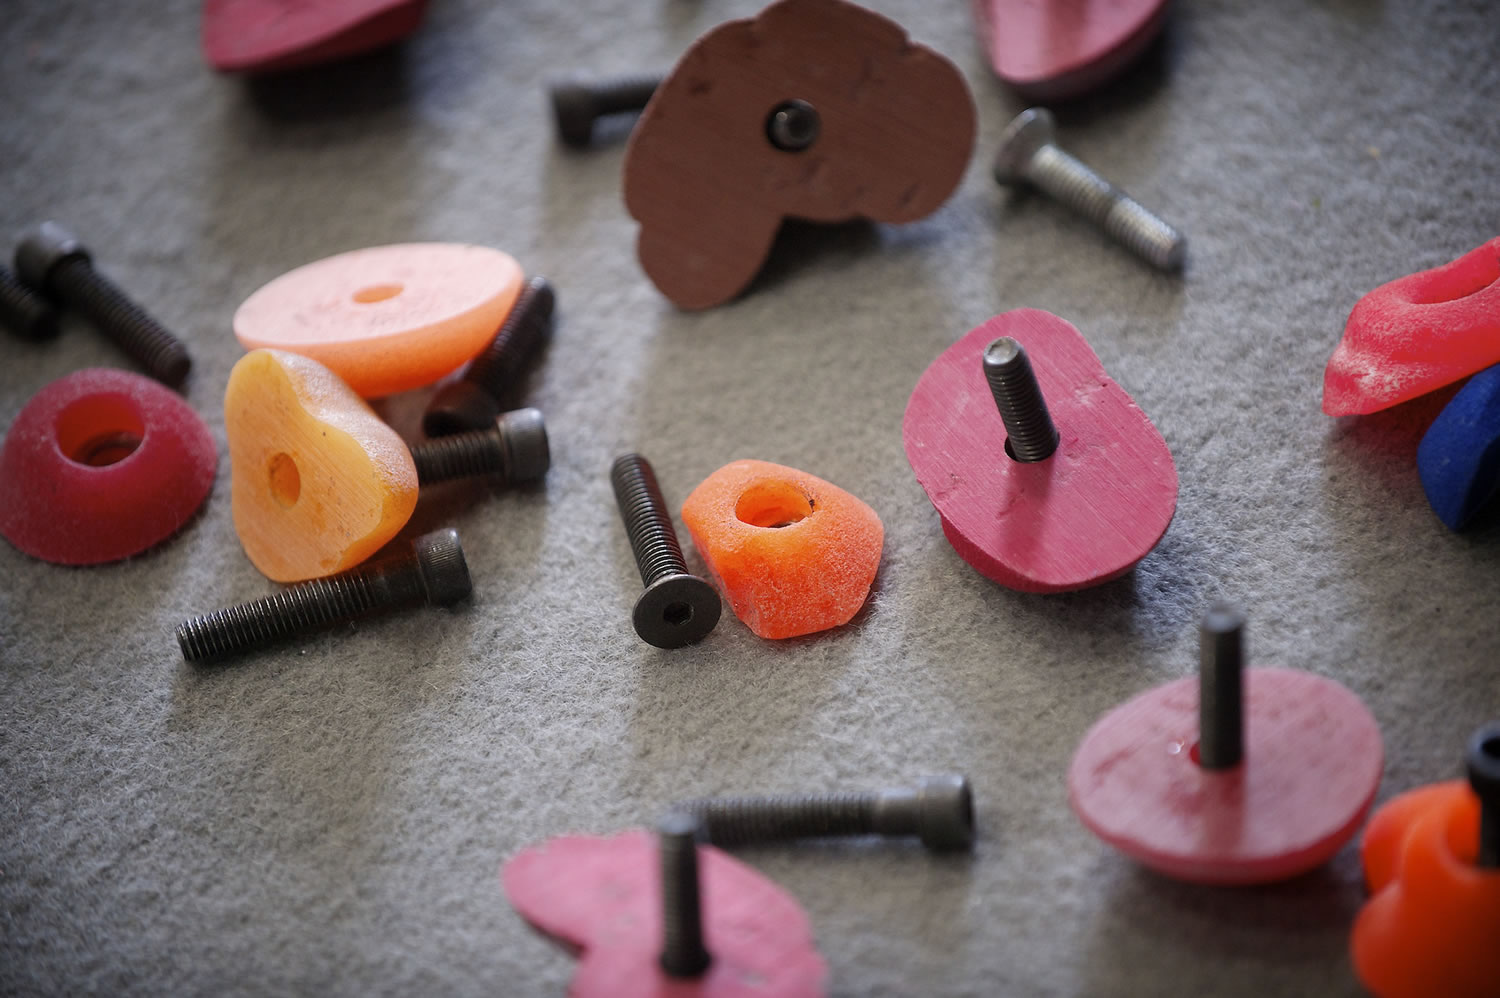 Climbing holds come in a variety of  shapes, sizes and textures, meant to represent climbing sites around the world.